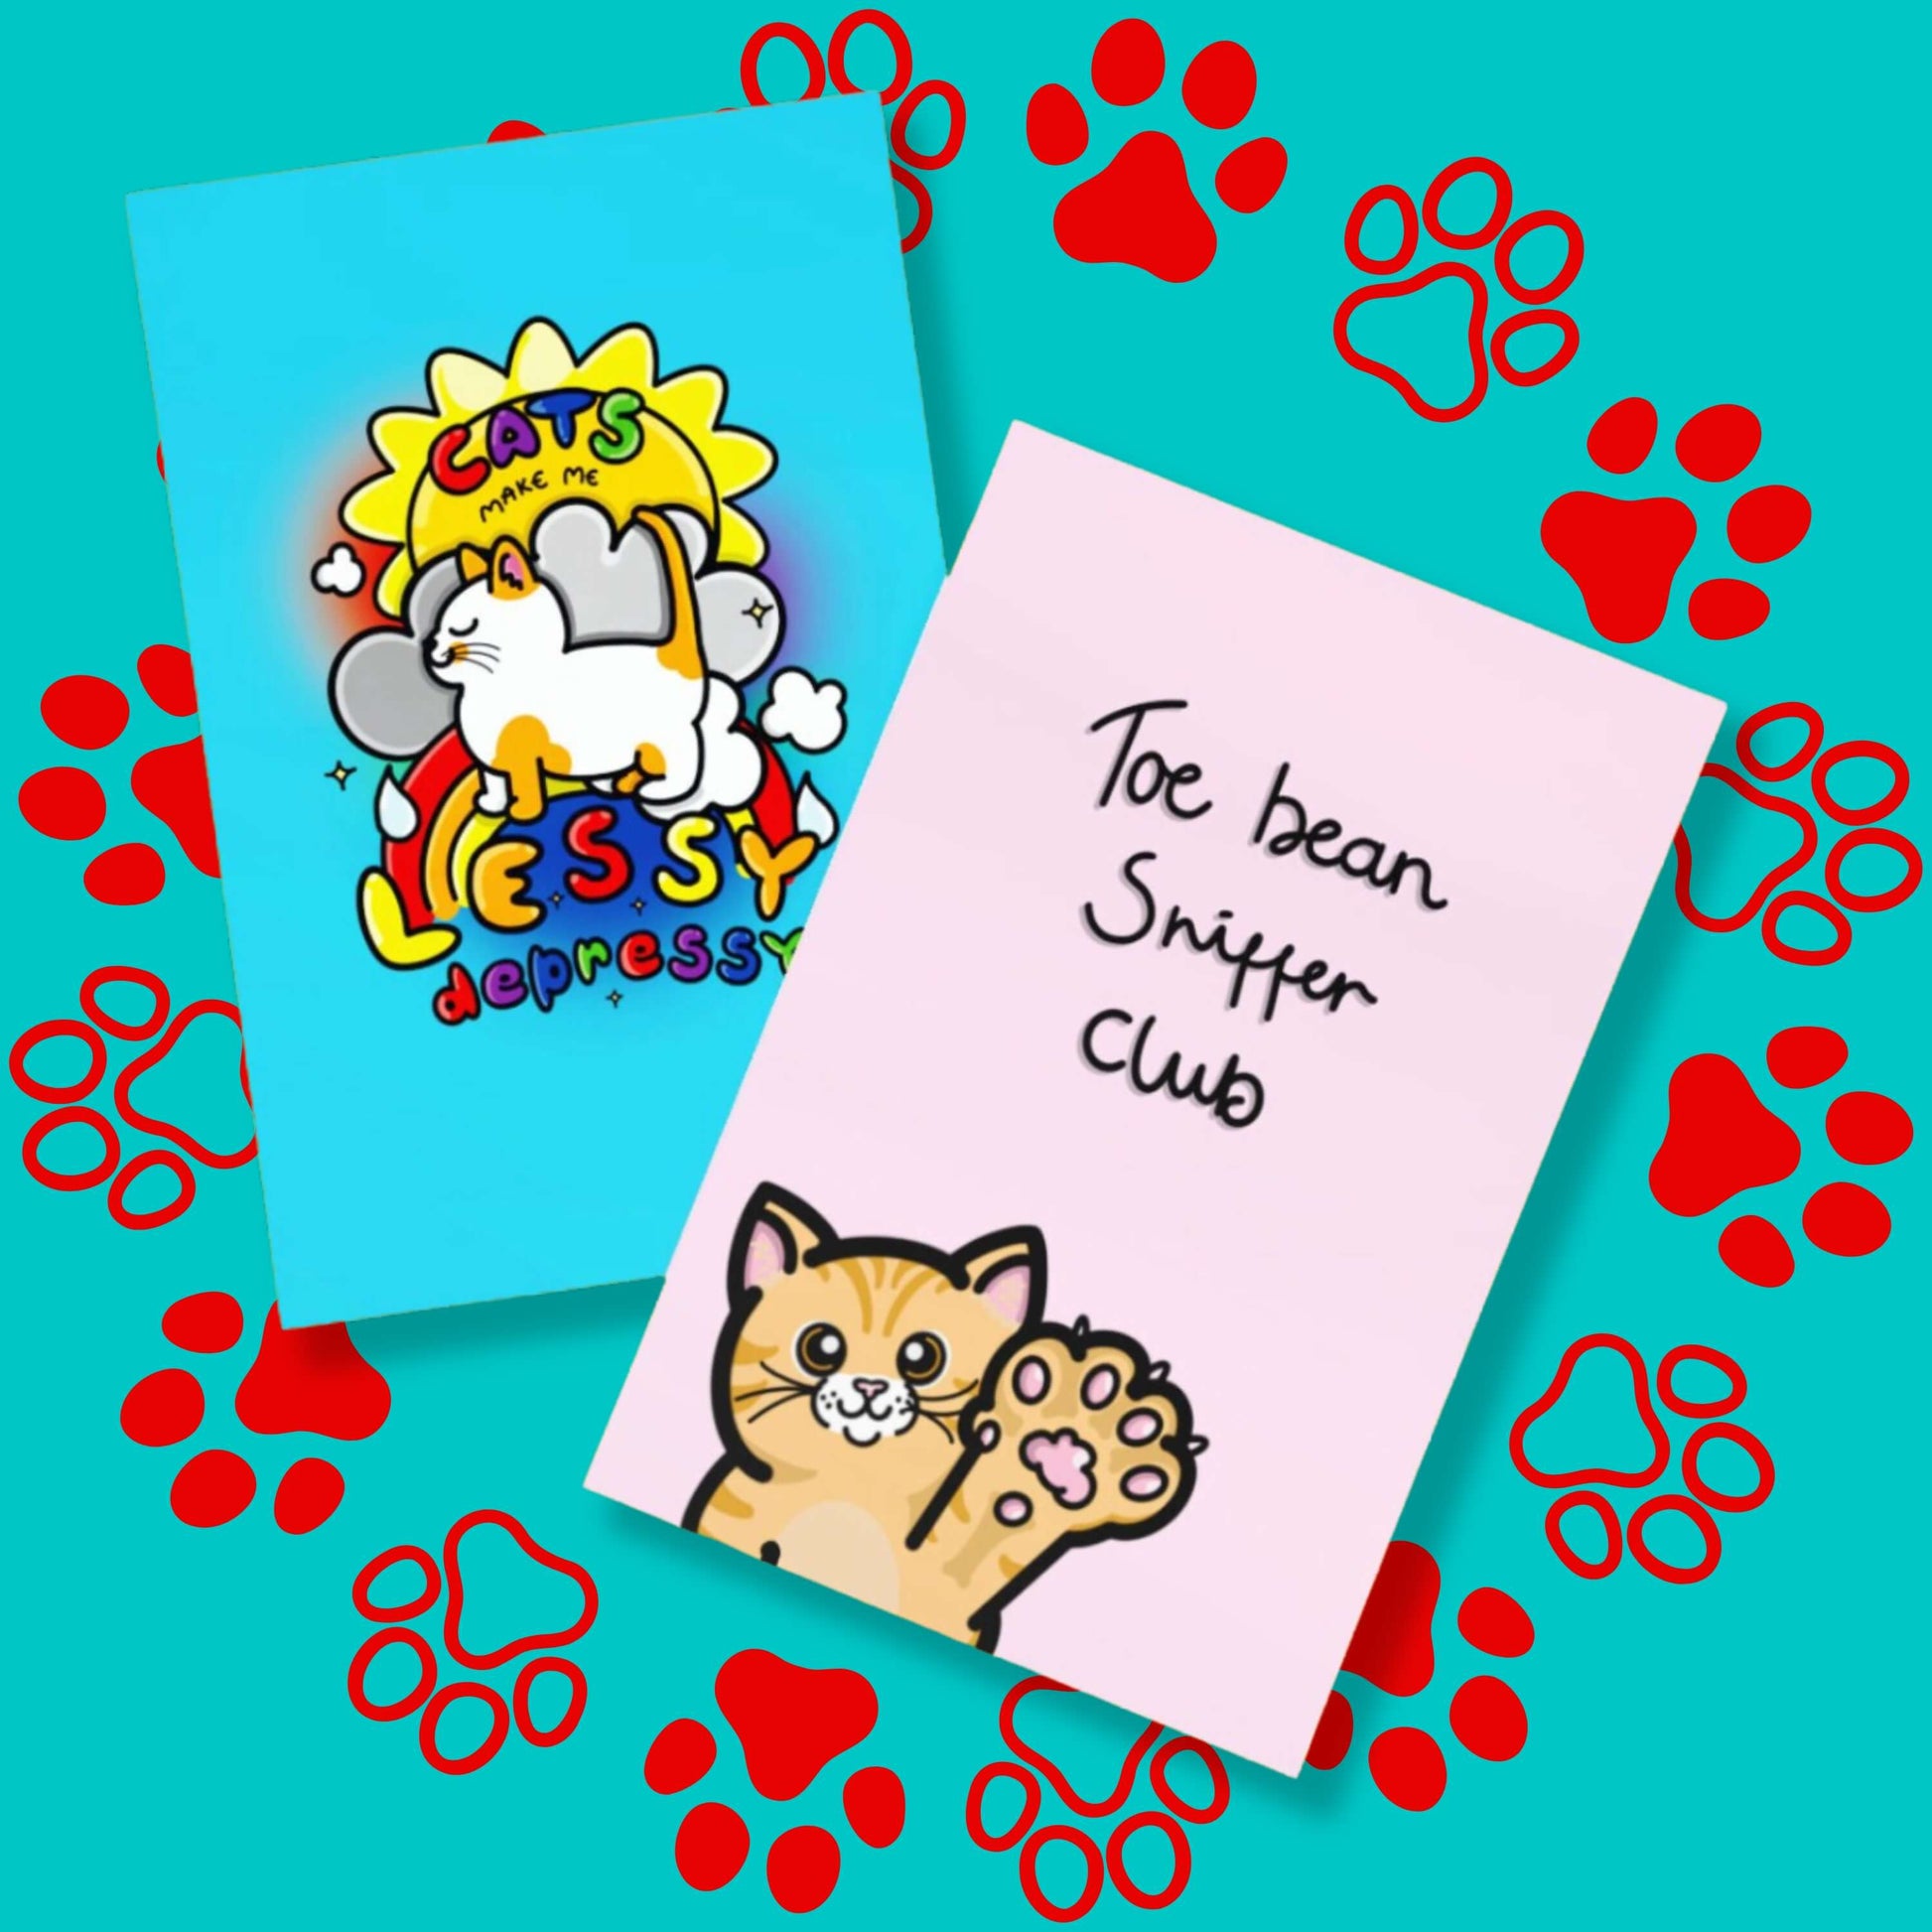 The Toe Bean Sniffer Club Card on a red and blue paw print background with the cats make me lessy depressy blue a6 card underneath. The pastel pink a6 greeting card features a smiling orange cat reaching its paw up with black text above reading 'toe bean sniffer club'.